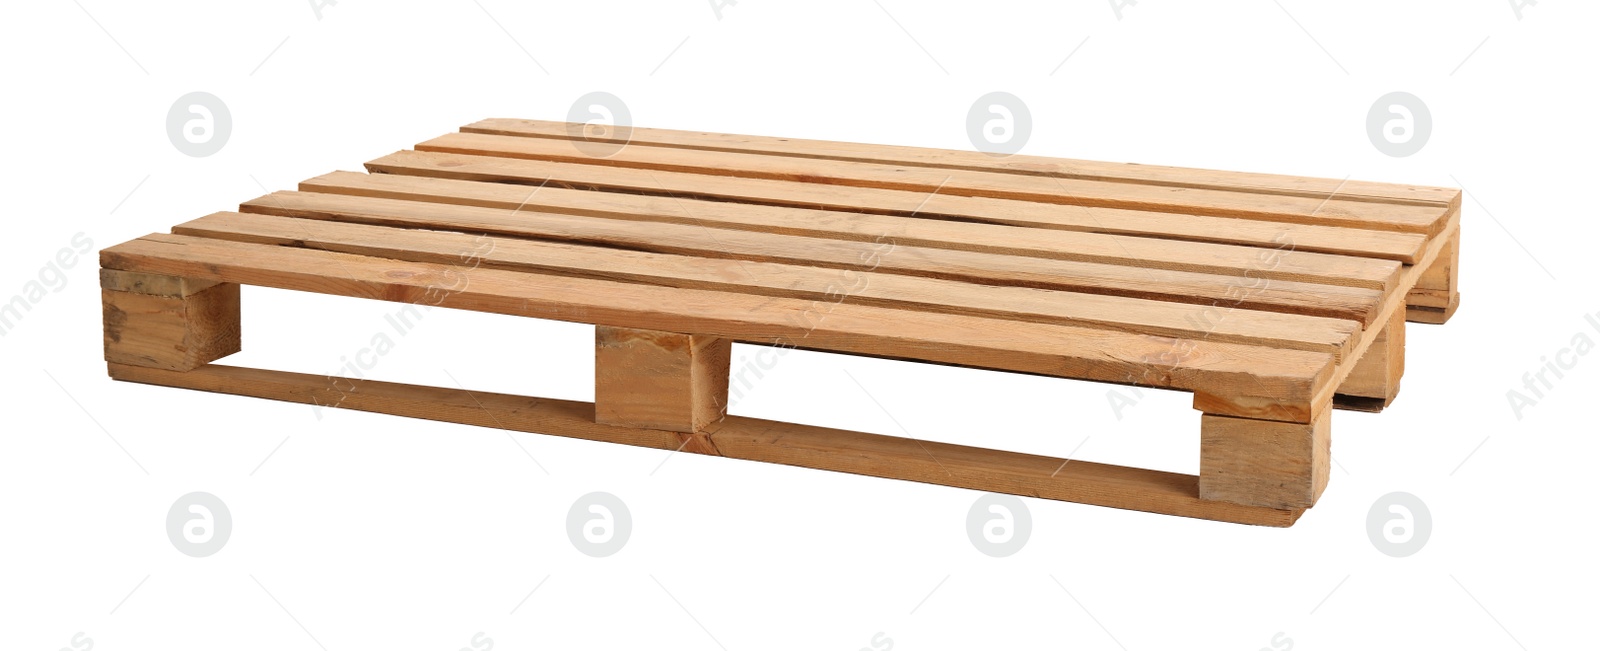 Photo of Wooden pallet isolated on white. Transportation and storage